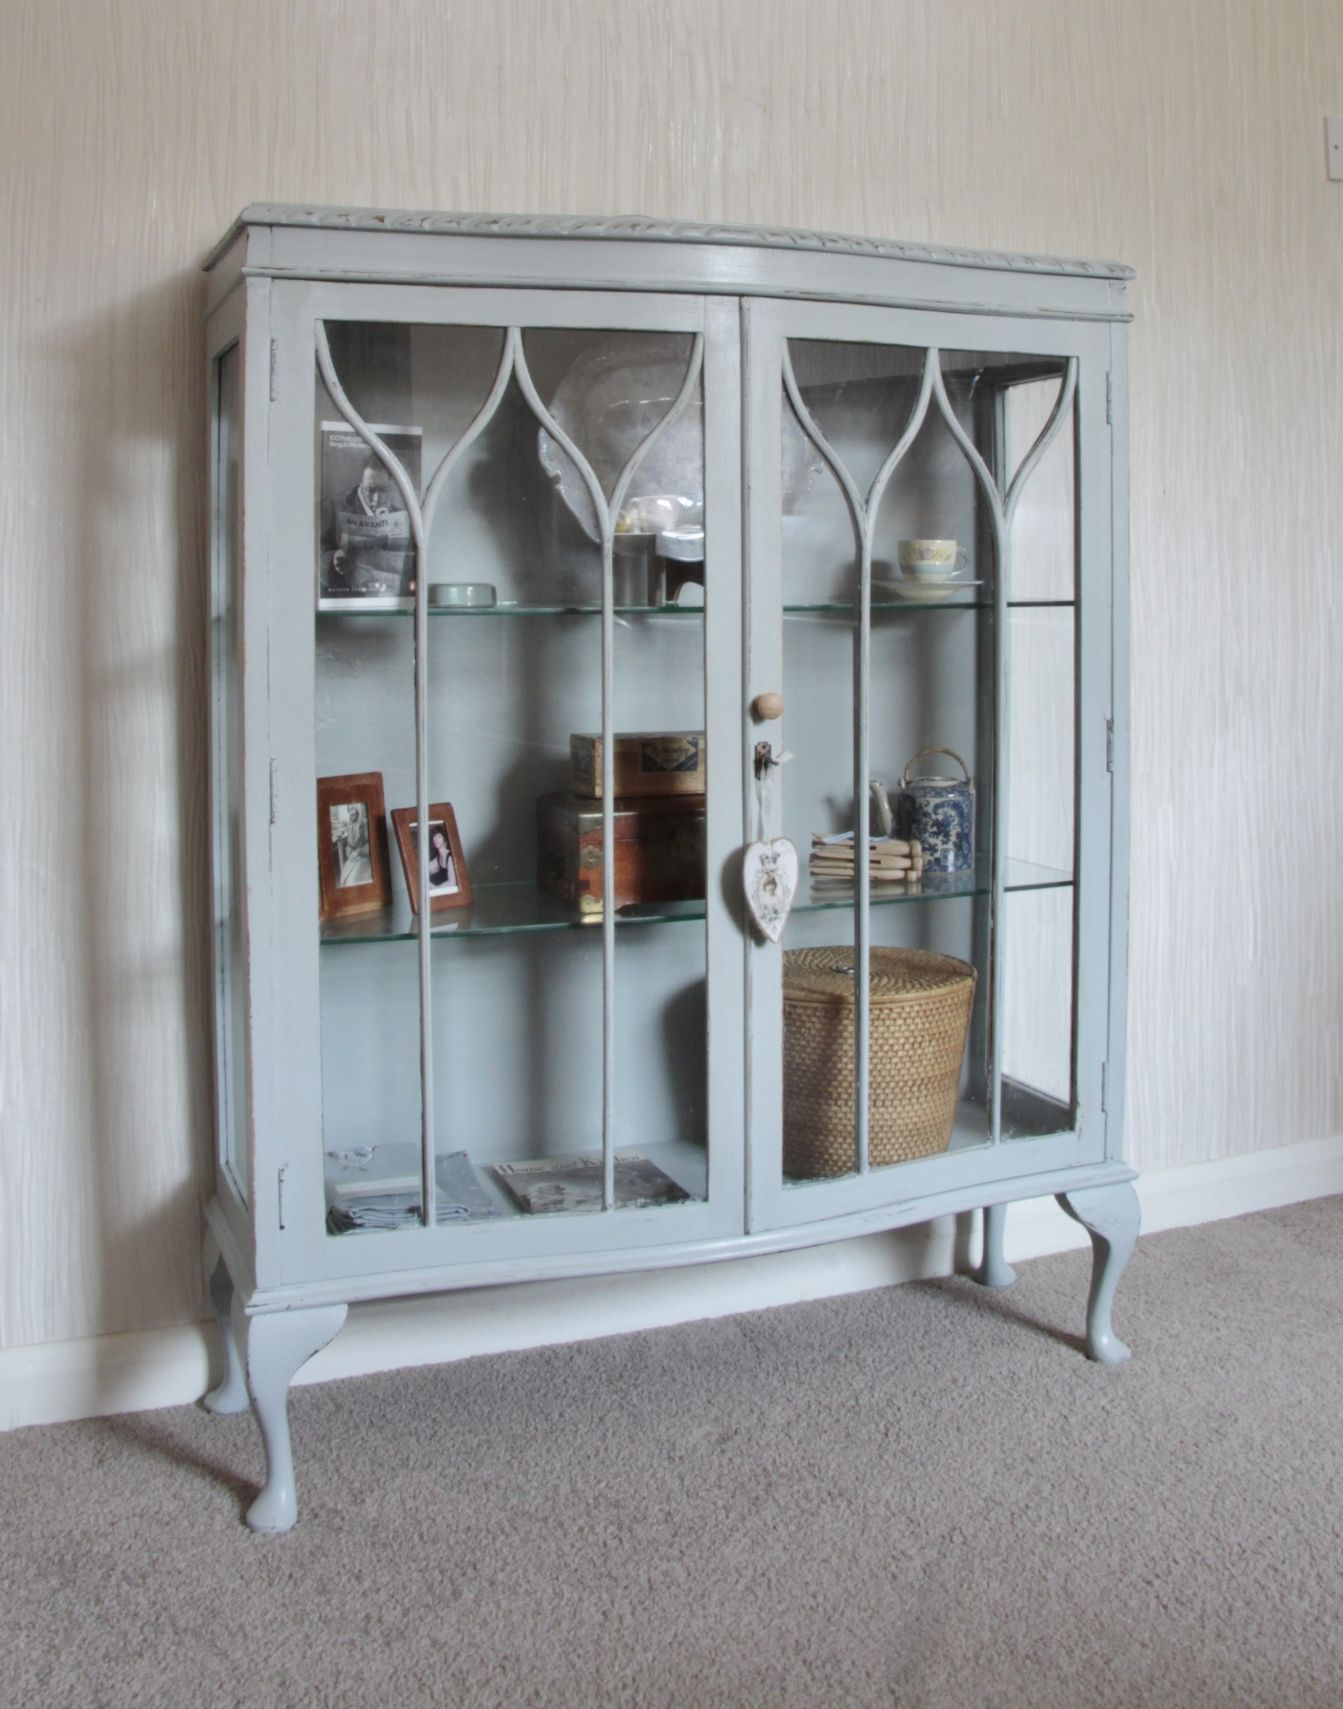 Pretty Old Shab Chic Display Cabinet Retail Display For Mom pertaining to sizing 1343 X 1709